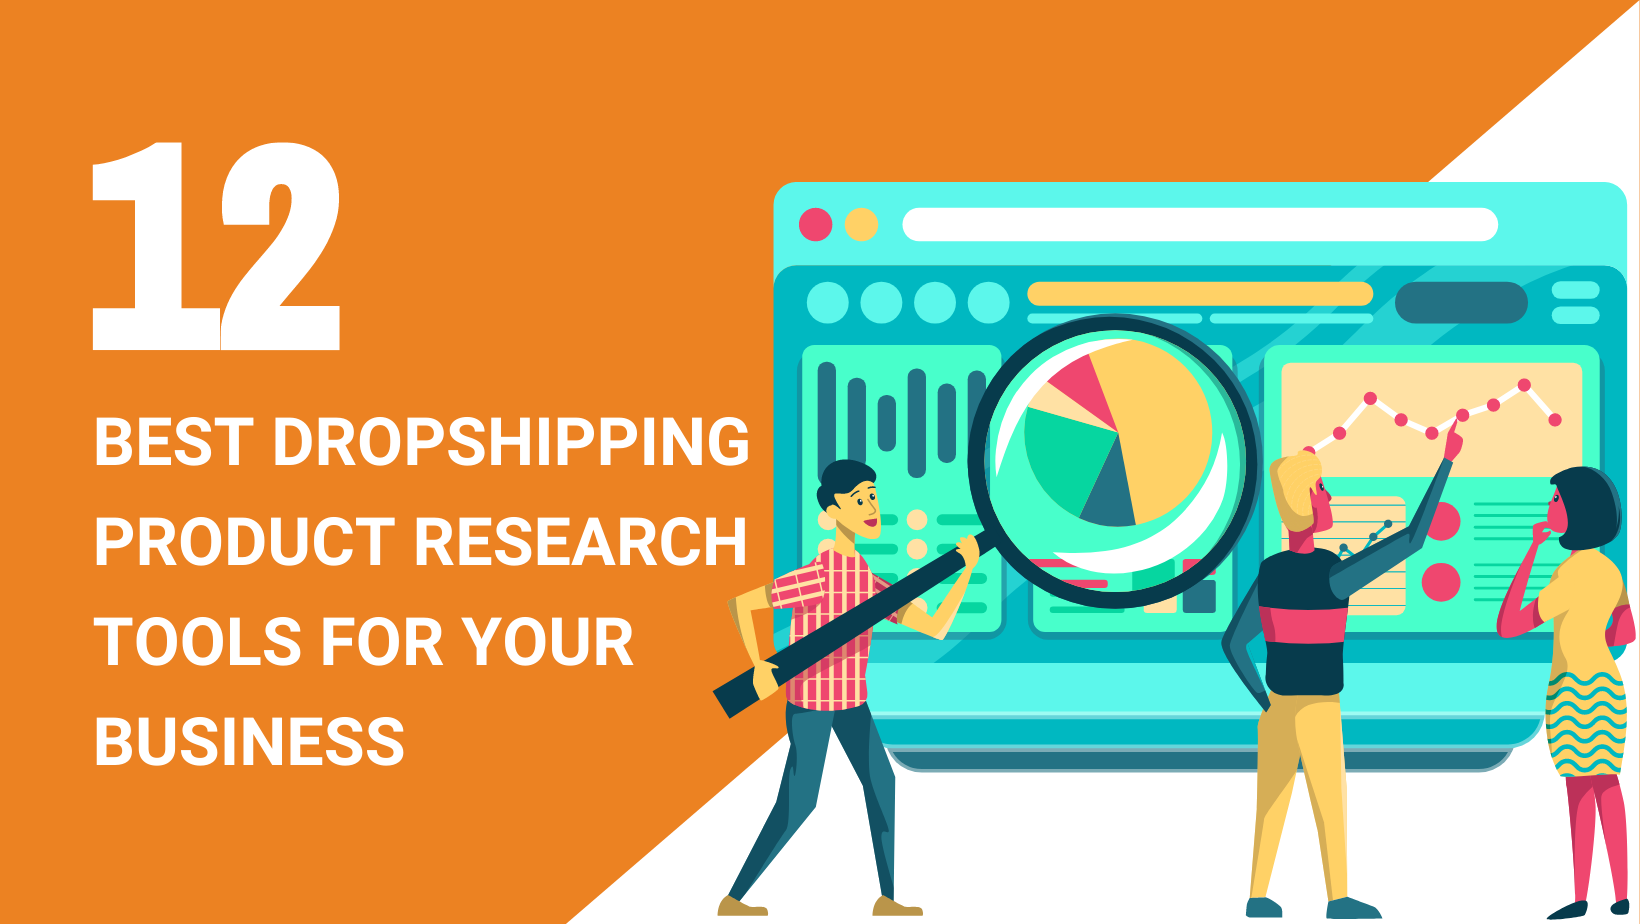 12 BEST DROPSHIPPING PRODUCT RESEARCH TOOLS FOR YOUR BUSINESS